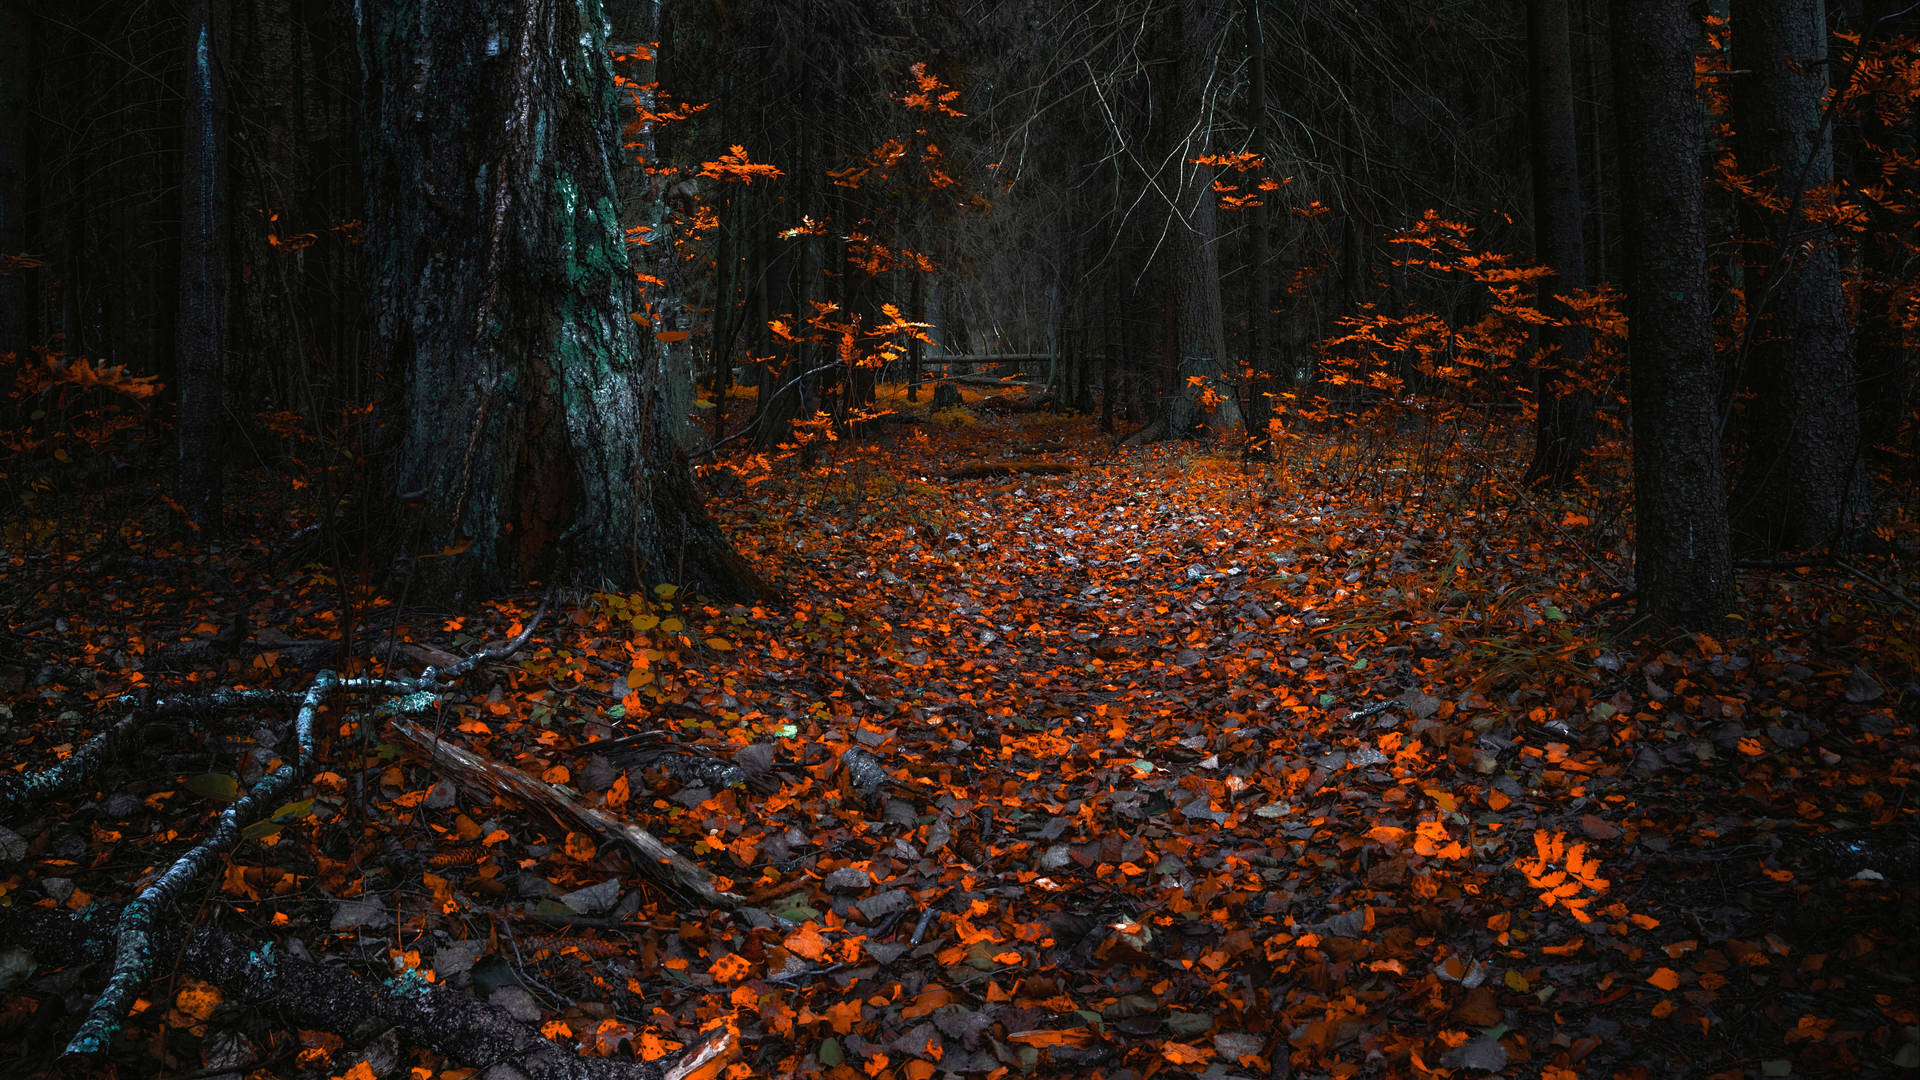 Thick trees with fallen orange leaves on the ground in autumn wallpaper.